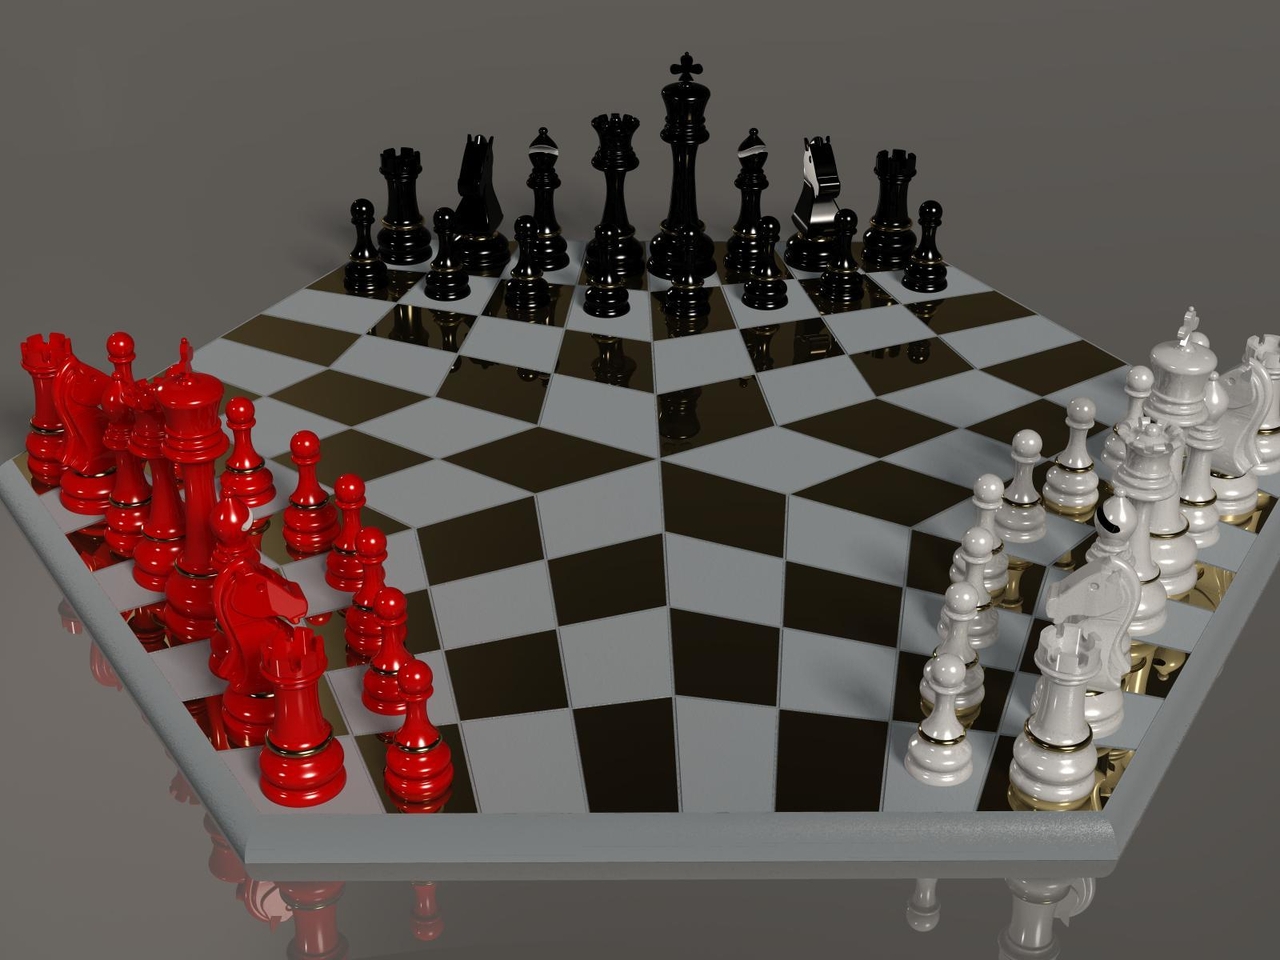 Image: Chess, chess board, cells, red, black, white, game, reflection